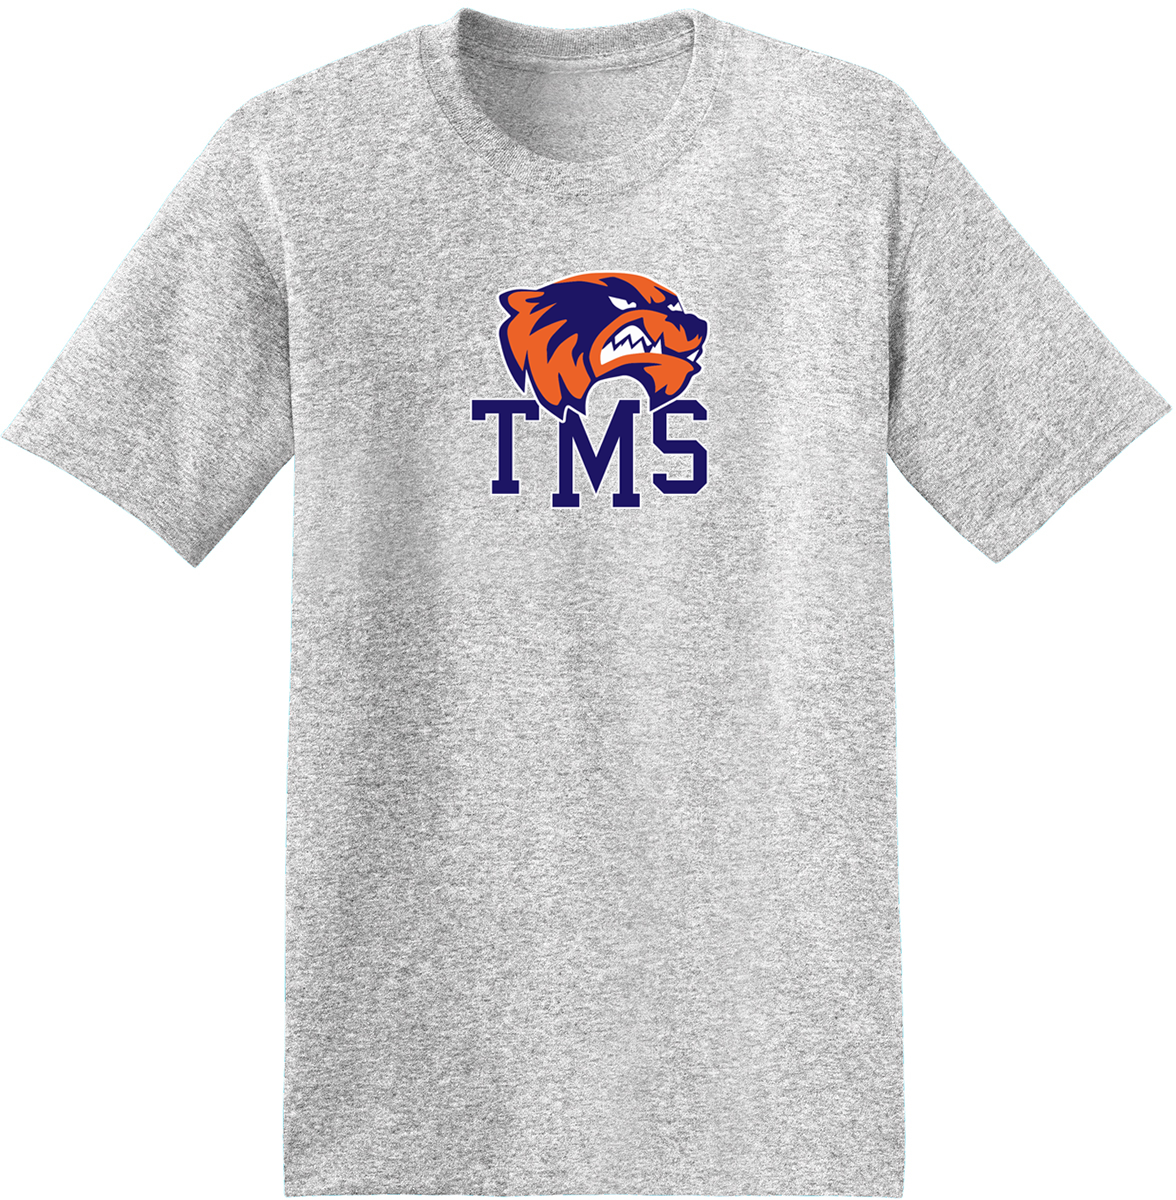 TMS Track & Field T-Shirt